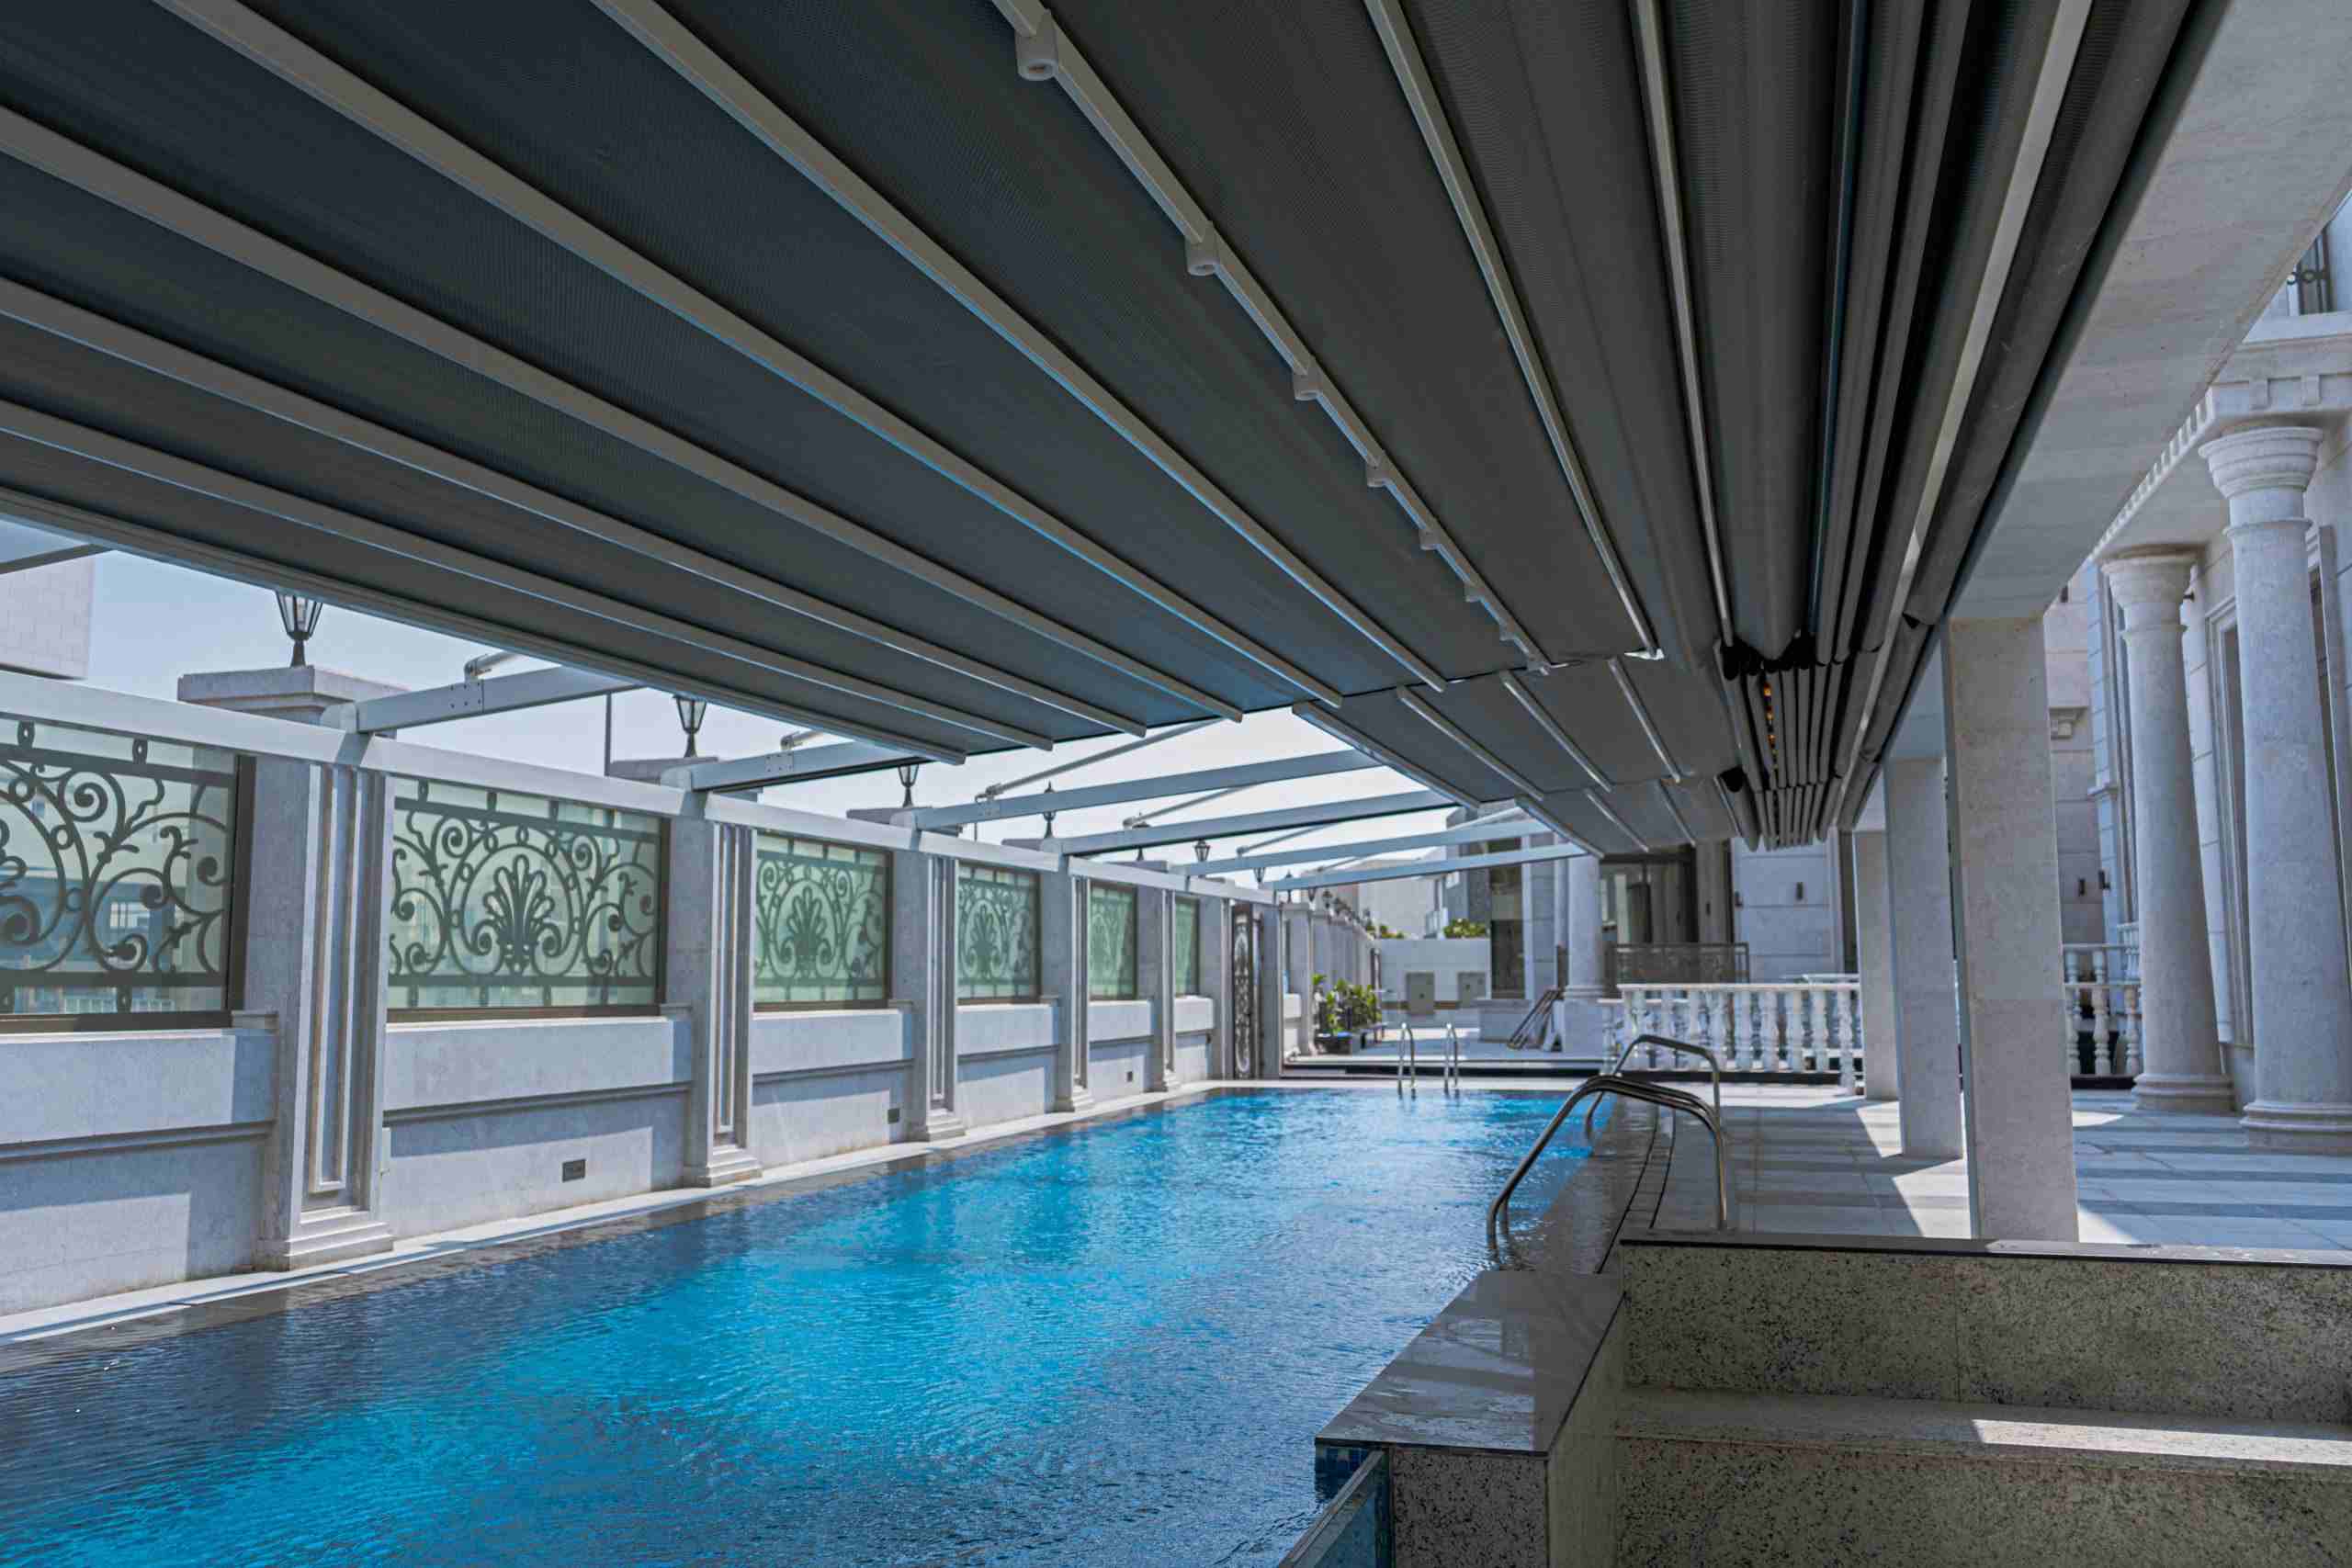 Pergola shading a swimming pool with partially open roof